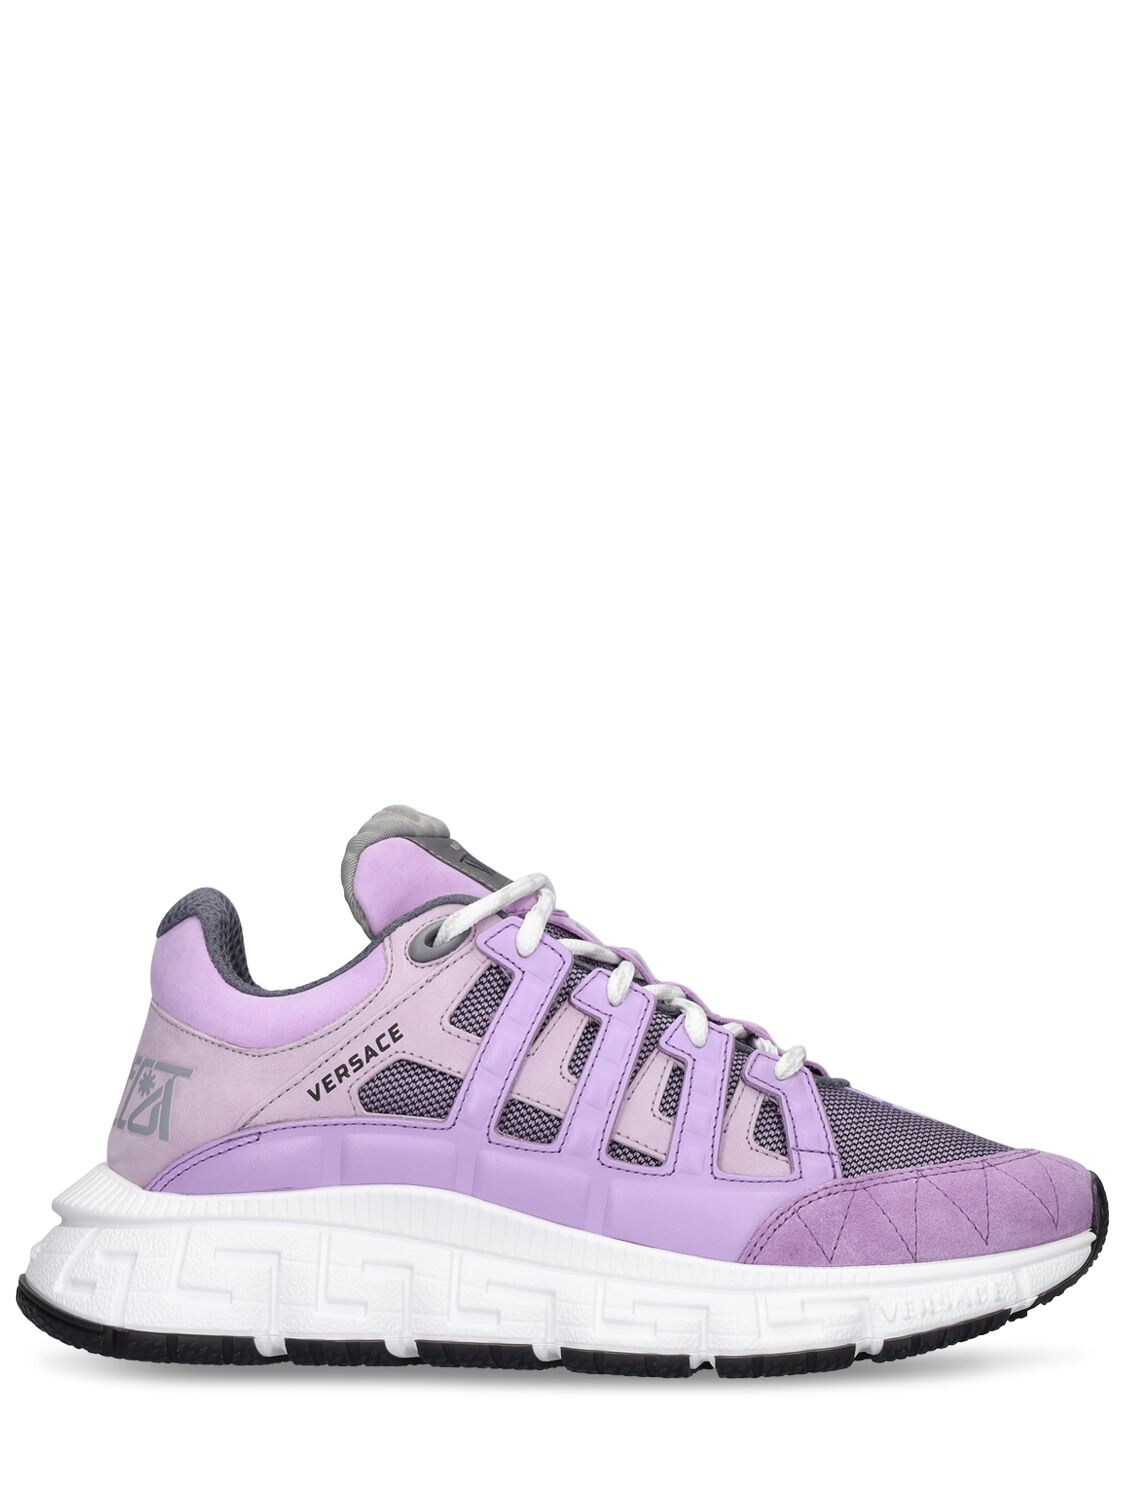 Louis Vuitton Women's Run Away Sneakers Mesh with Monogram Canvas and Suede  Pink 2293432